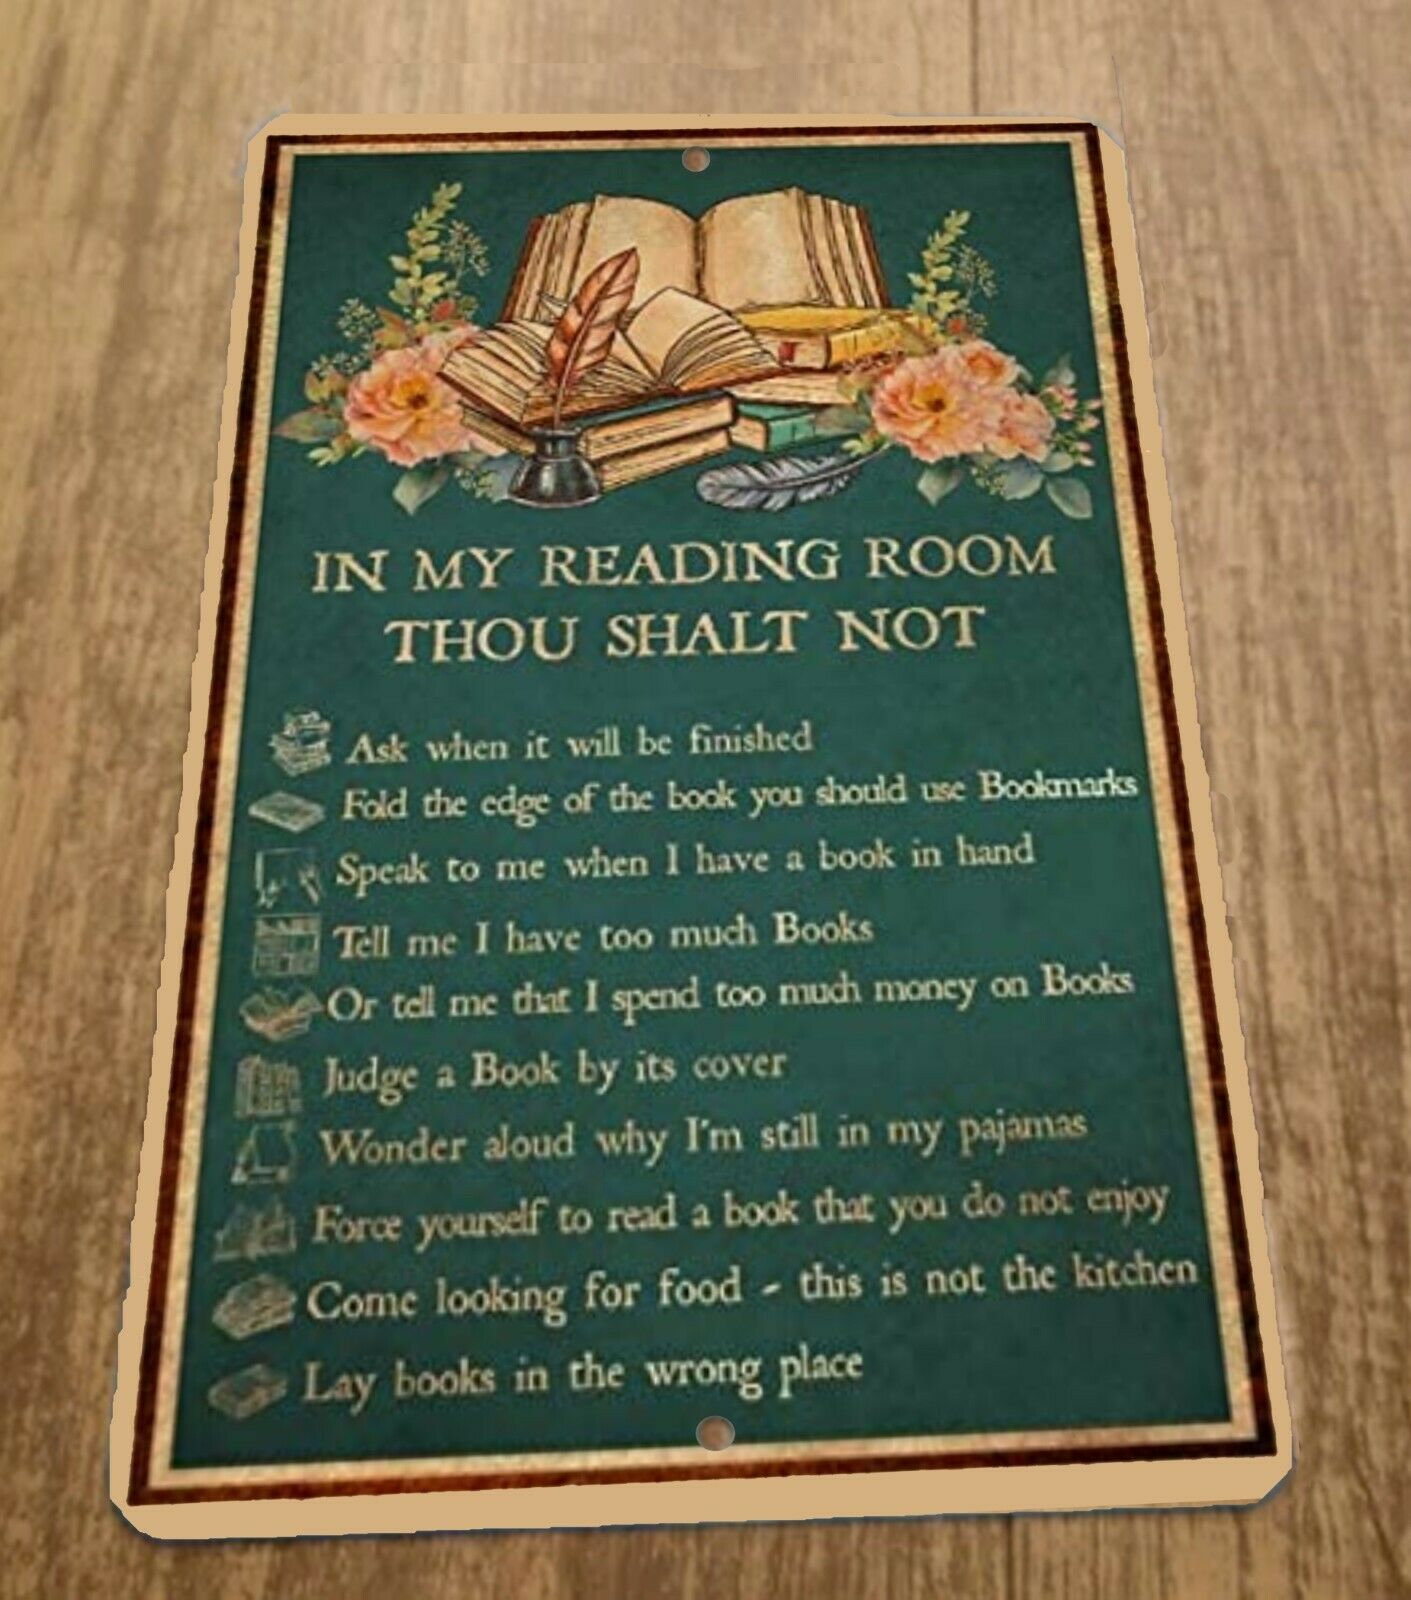 Reading Room Rules 8x12 Metal Wall Sign Misc Poster